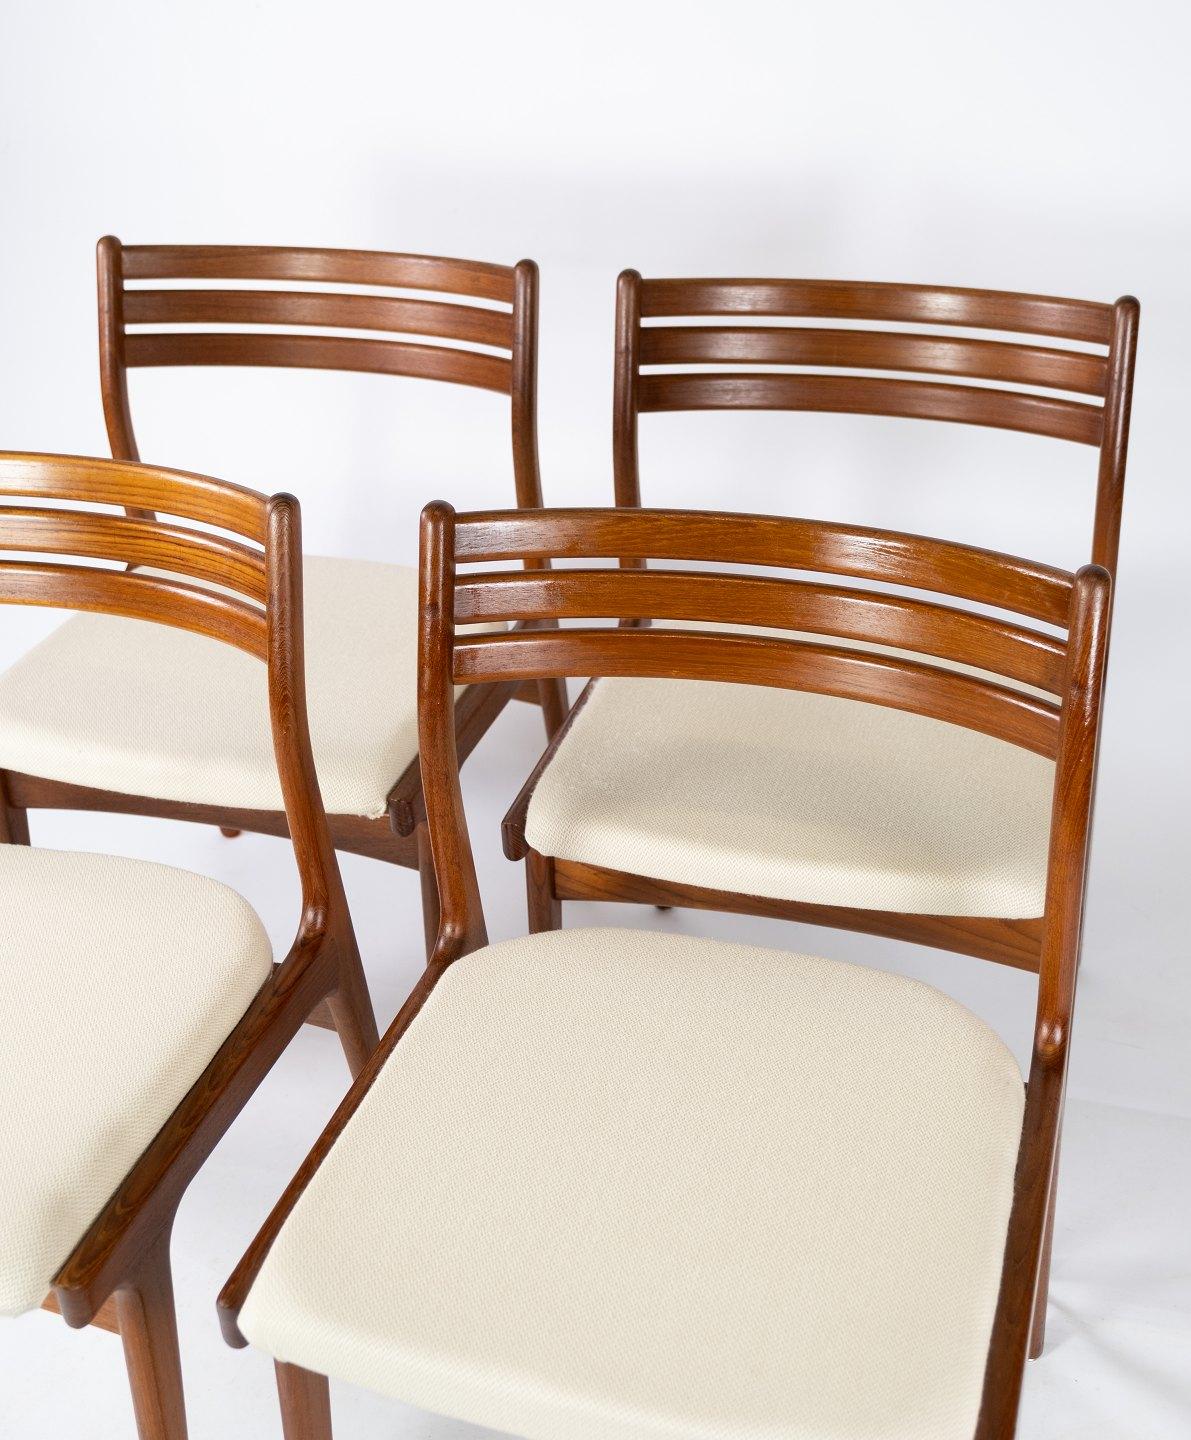 
This set of four dining room chairs epitomizes the quintessential Scandinavian design aesthetic of the 1960s. Crafted from teak wood, these chairs boast a warm and inviting hue, characteristic of the era's naturalistic approach to furniture design.